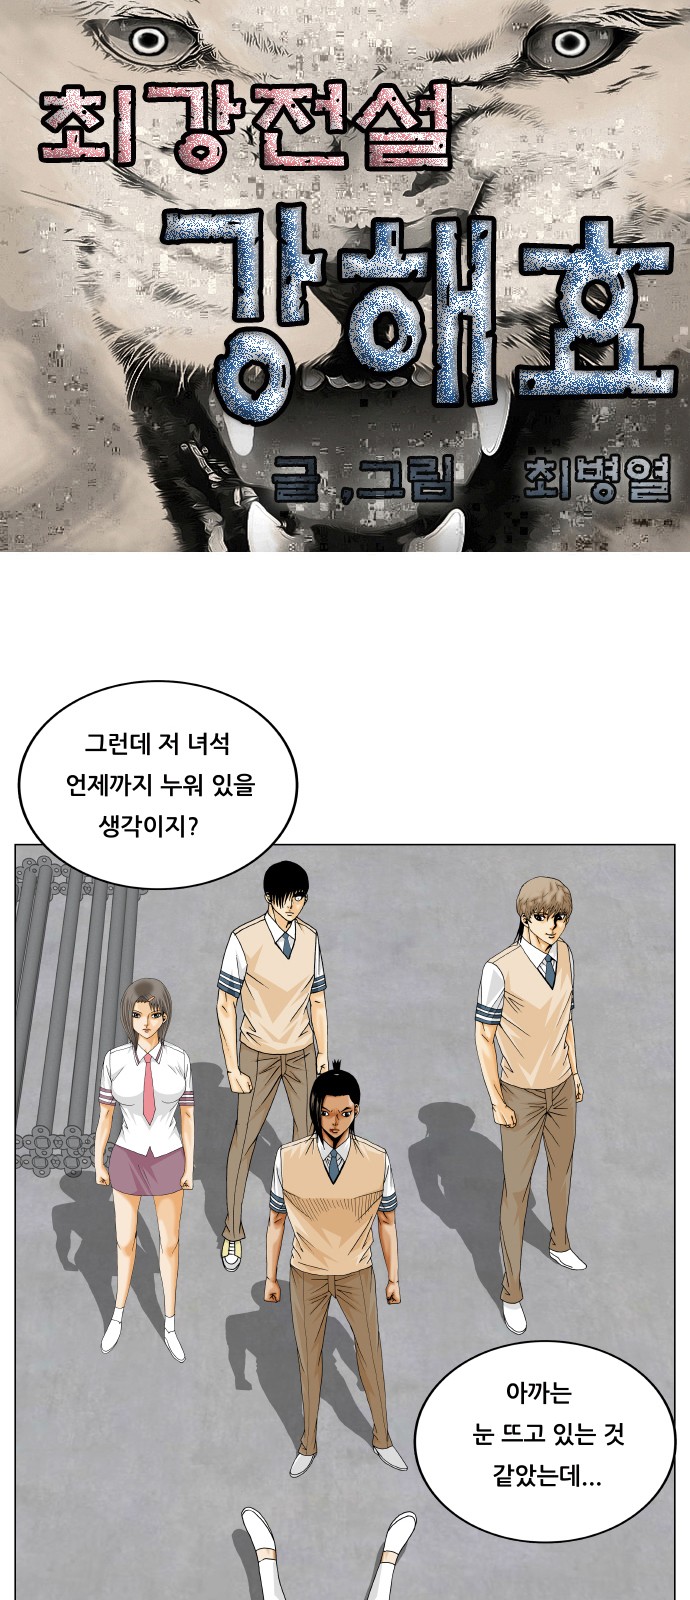 Ultimate Legend - Kang Hae Hyo - Chapter 358 - Page 1